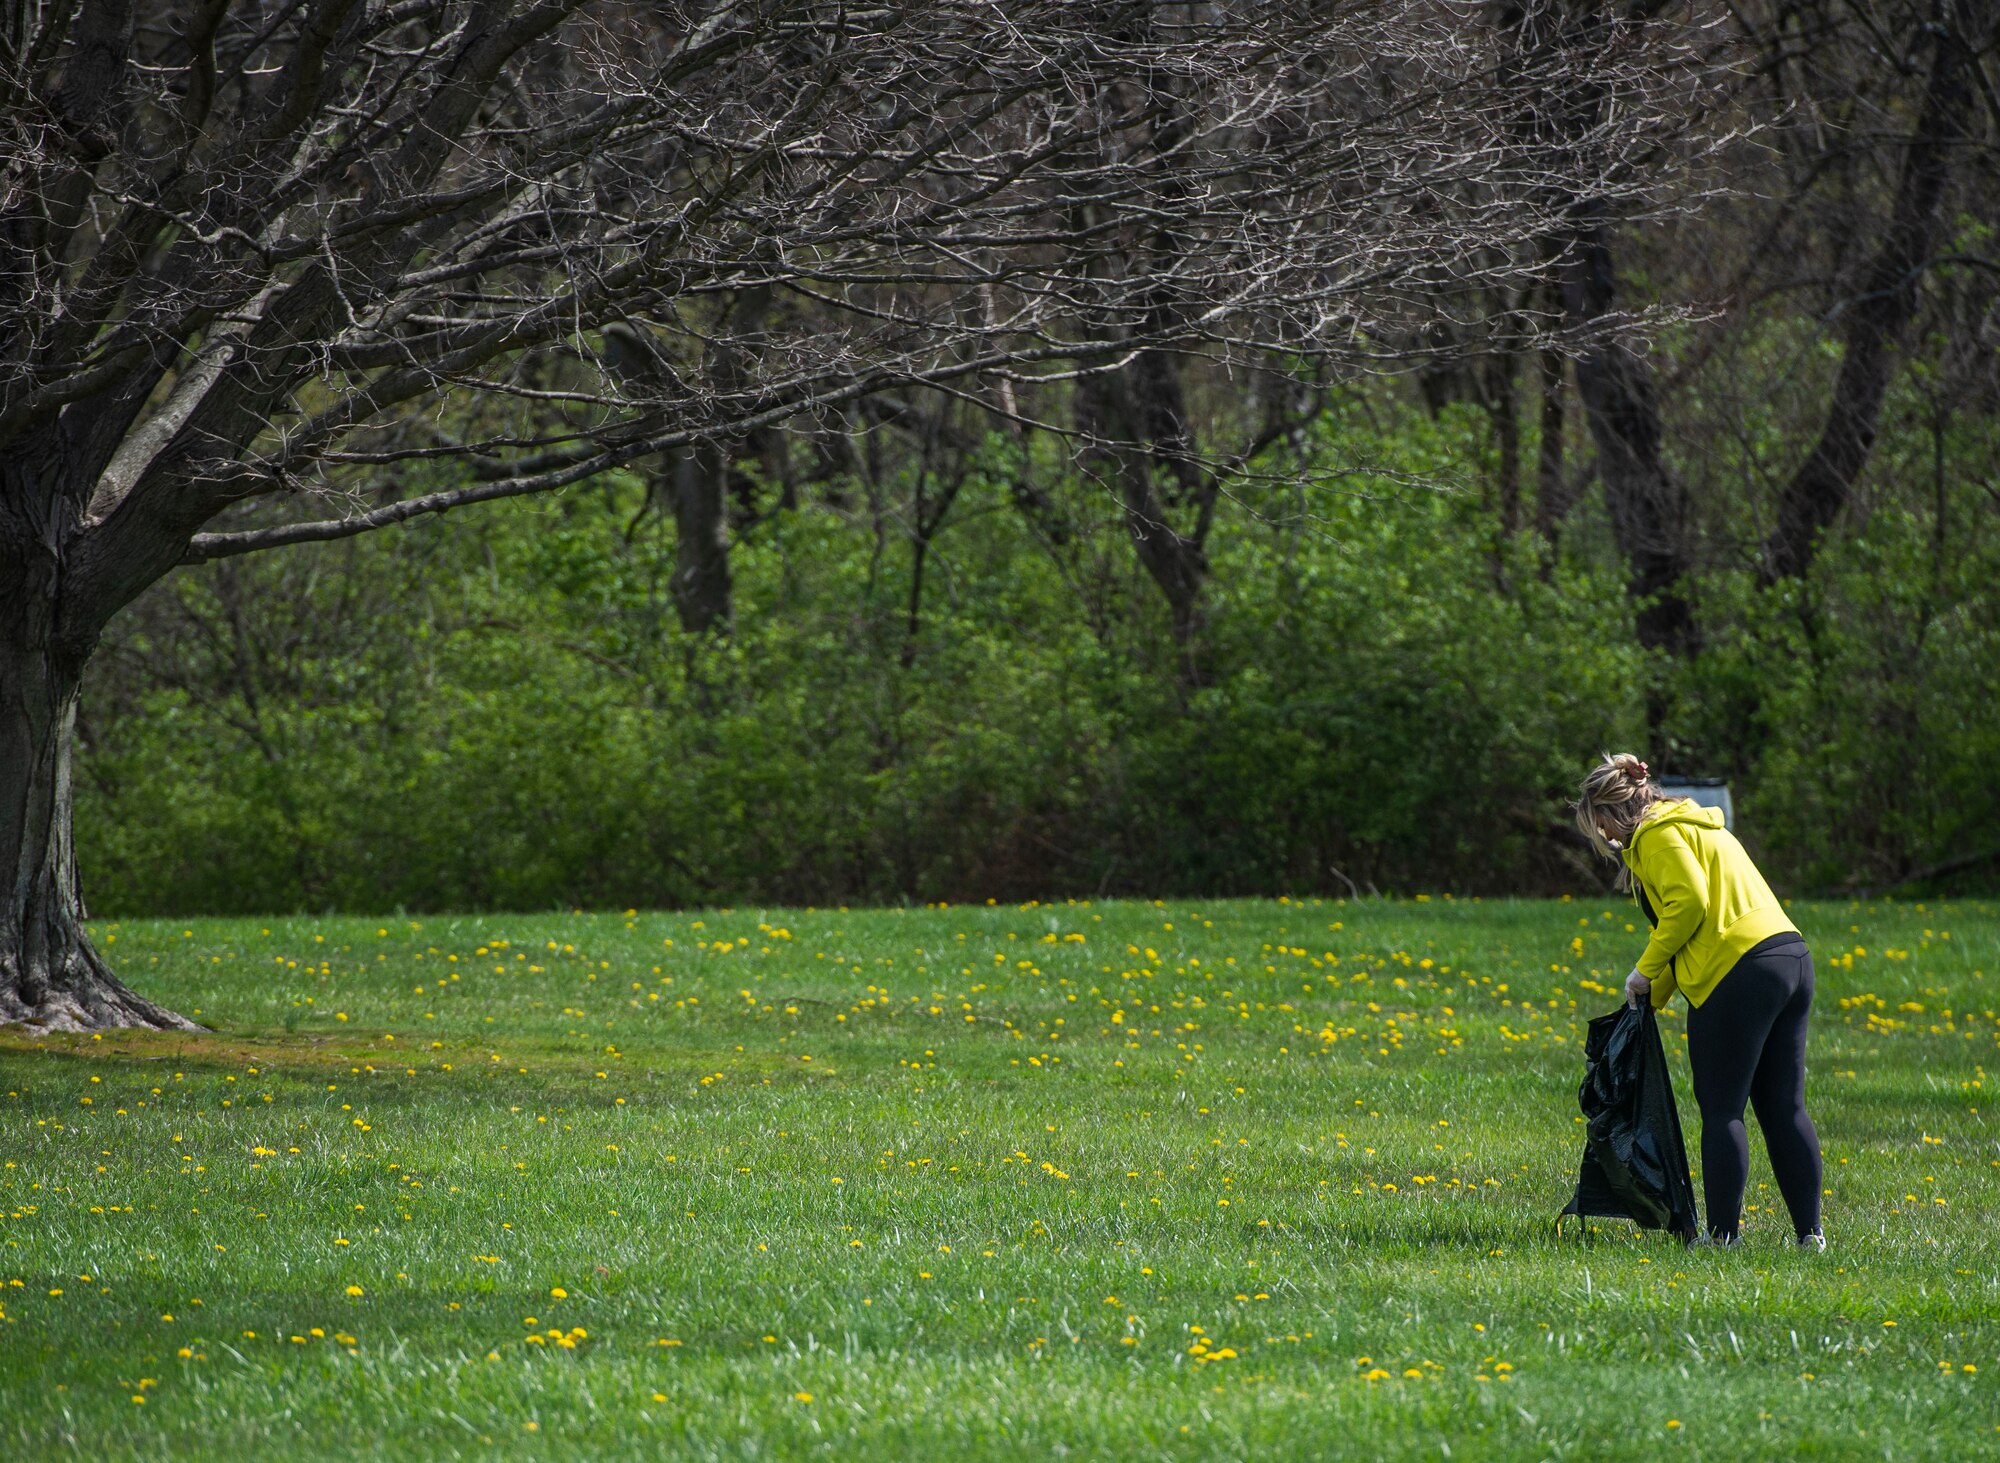 A volunteer picks up trash during an Earth Day event hosted by Wright-Patterson Air Force Base the City of Fairborn and the Beavercreek Wetlands Association at the Community Park in, Fairborn, Ohio, April 22, 2022. During the event volunteers picked up trash and debris in order to clean up the park. (U.S. Air Force photo by Wesley Farnsworth)